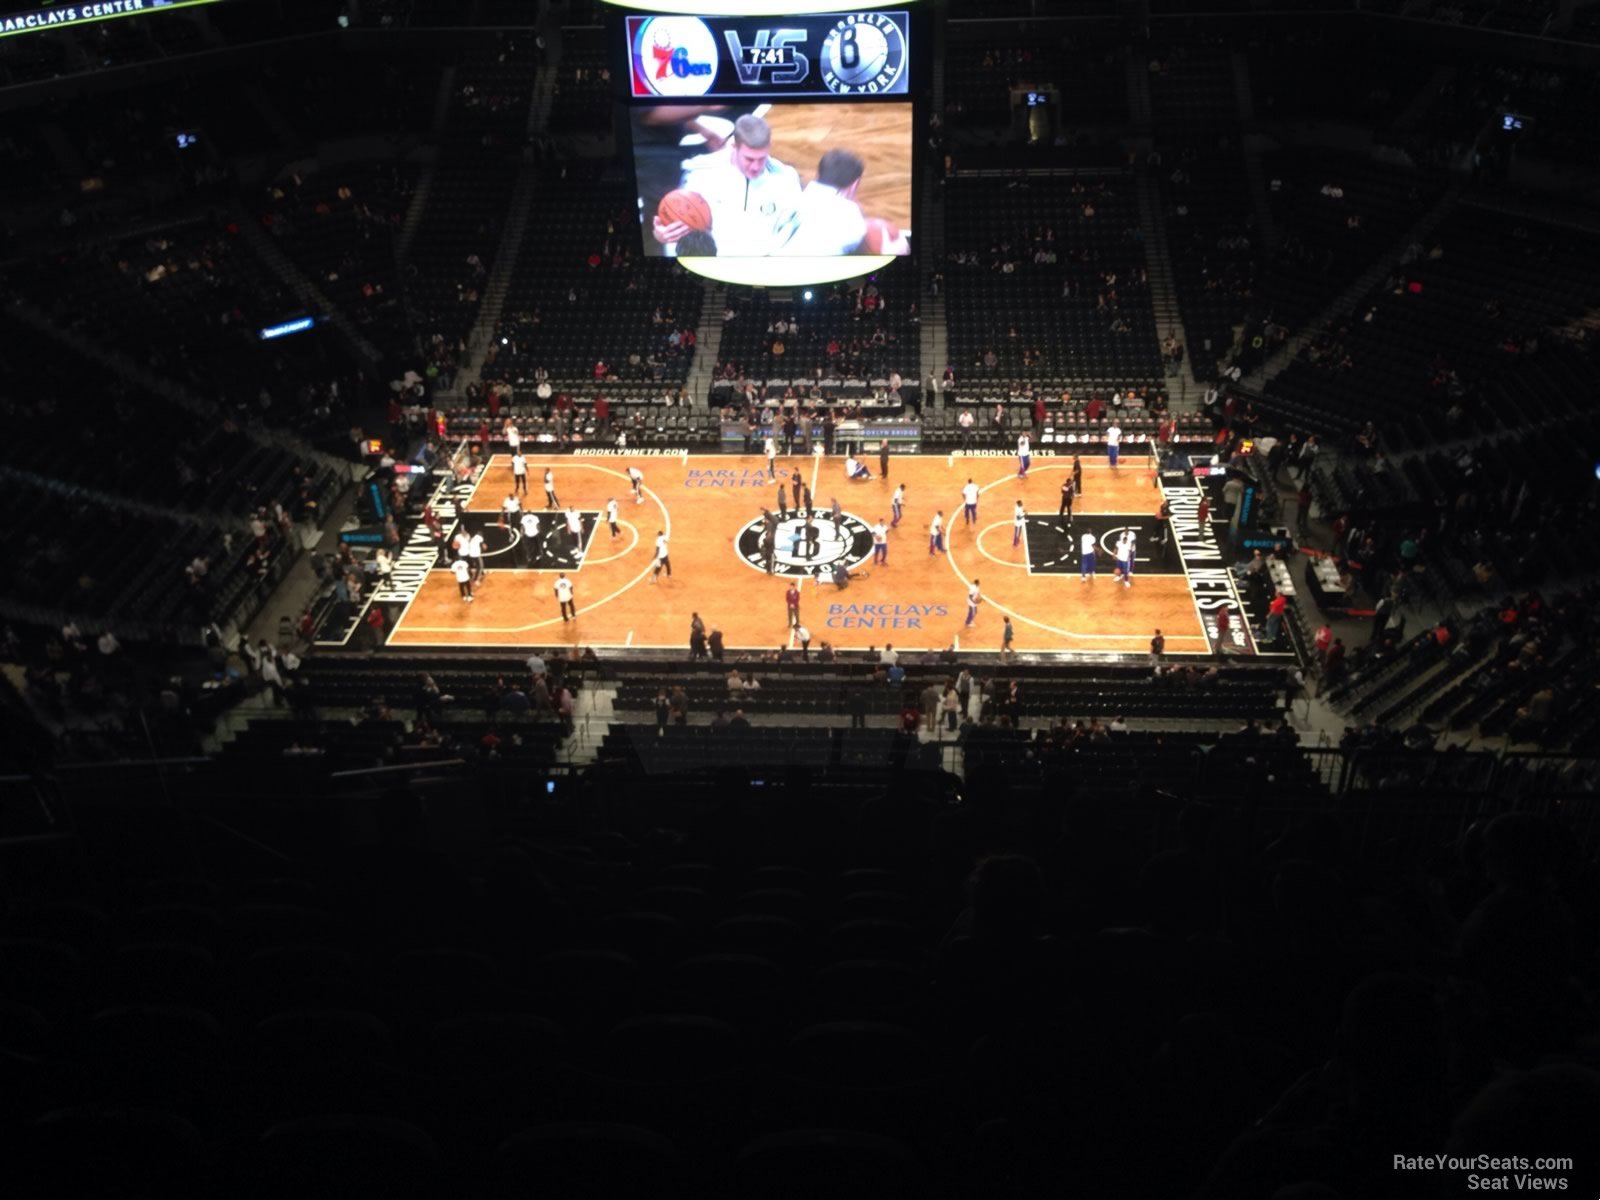 section 223, row 14 seat view  for basketball - barclays center